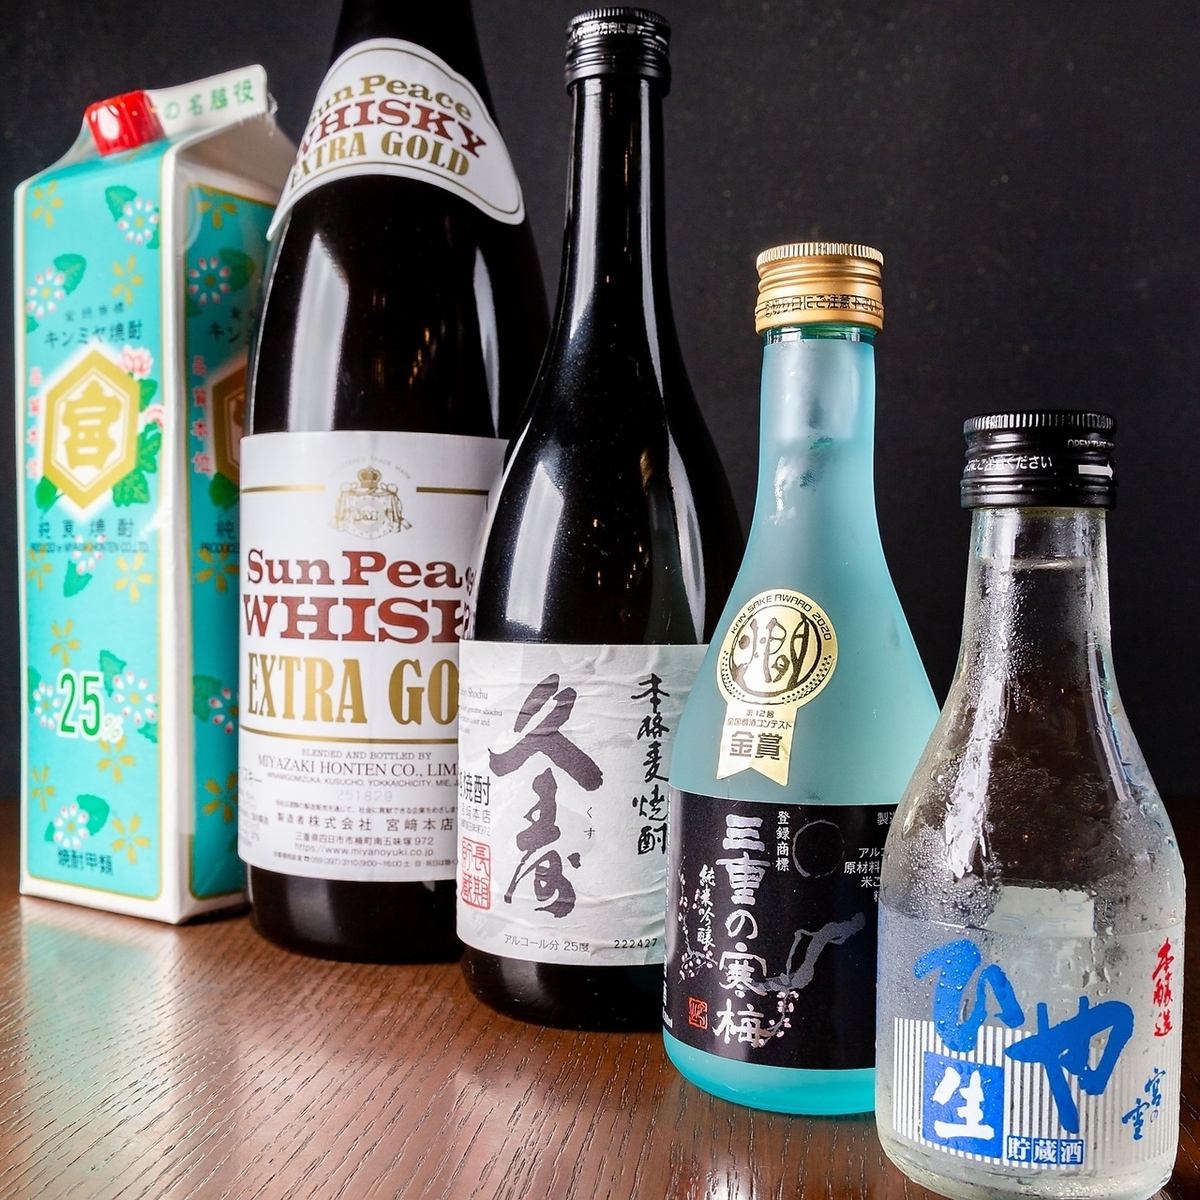 We also have alcoholic beverages from Mie Prefecture!